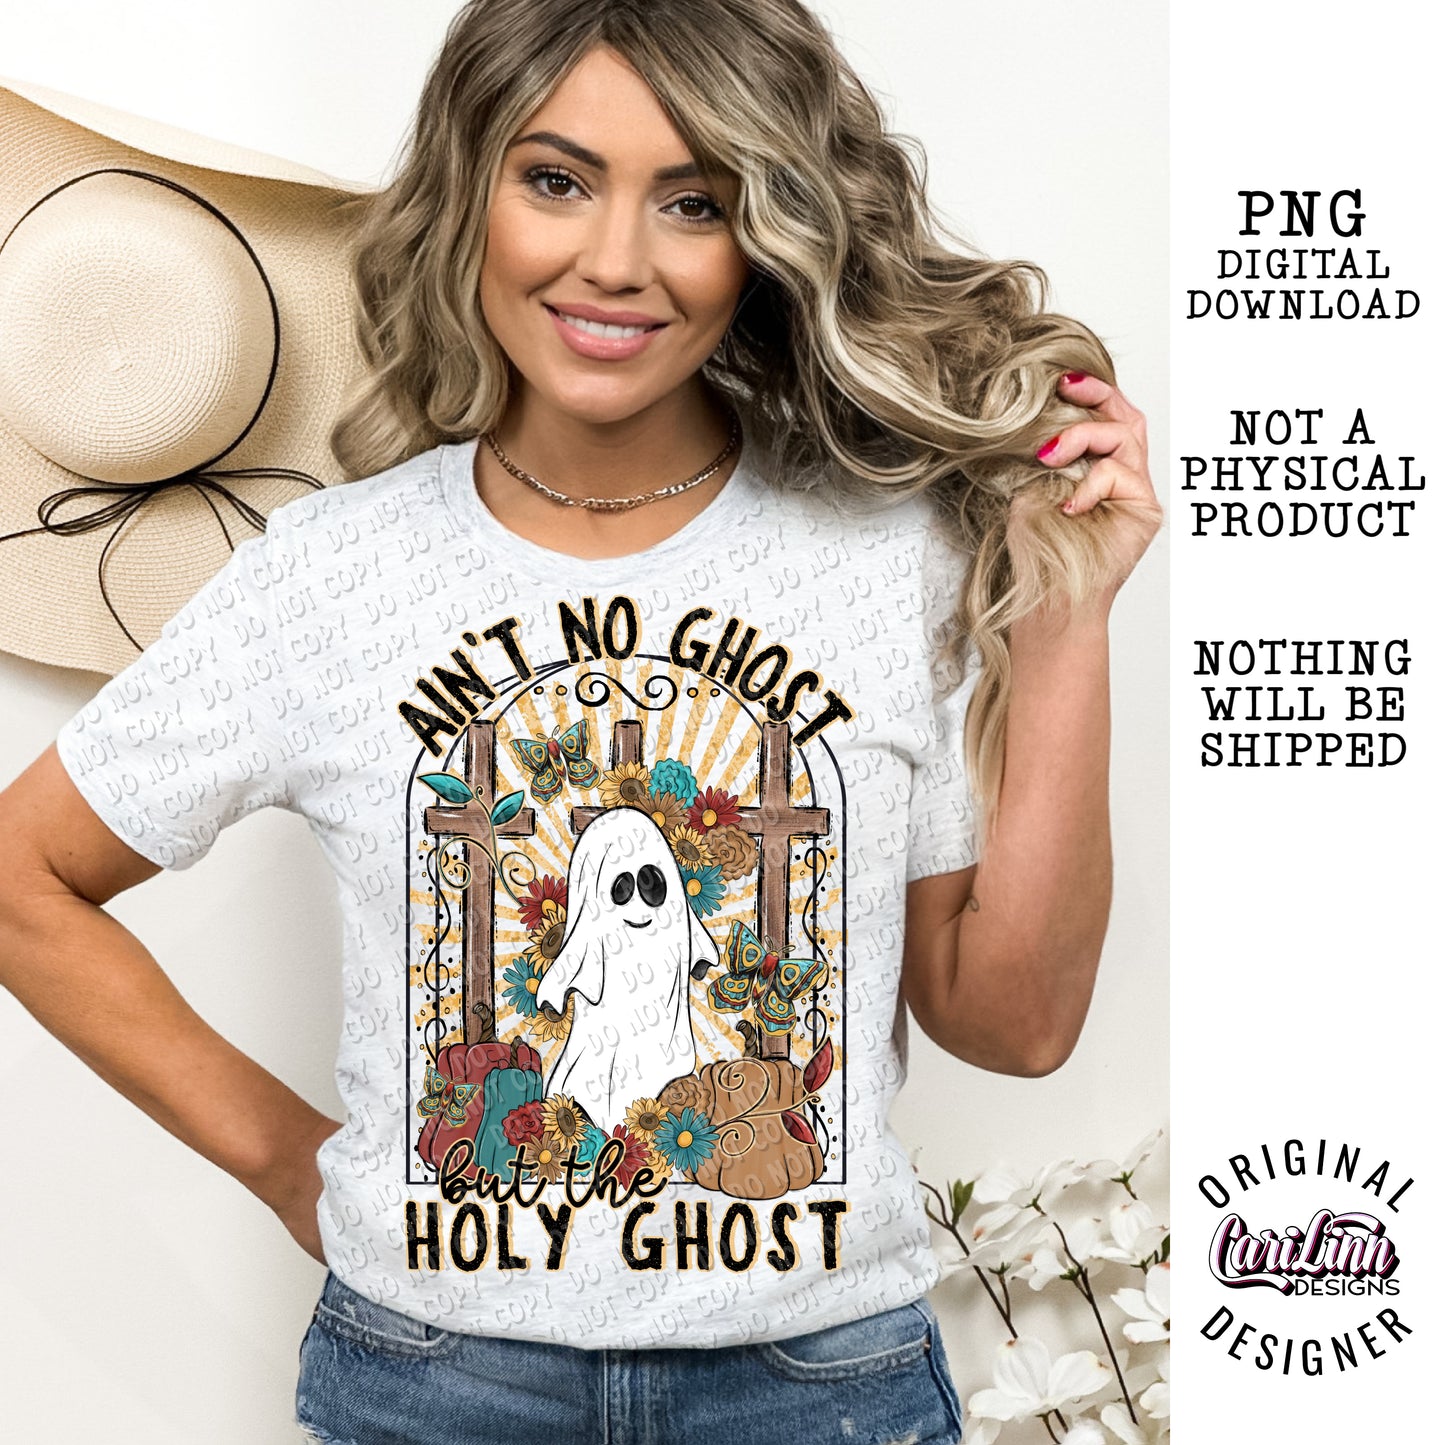 Ain't No Ghost But The Holy Ghost, PNG Digital Download for Sublimation, DTF, DTG